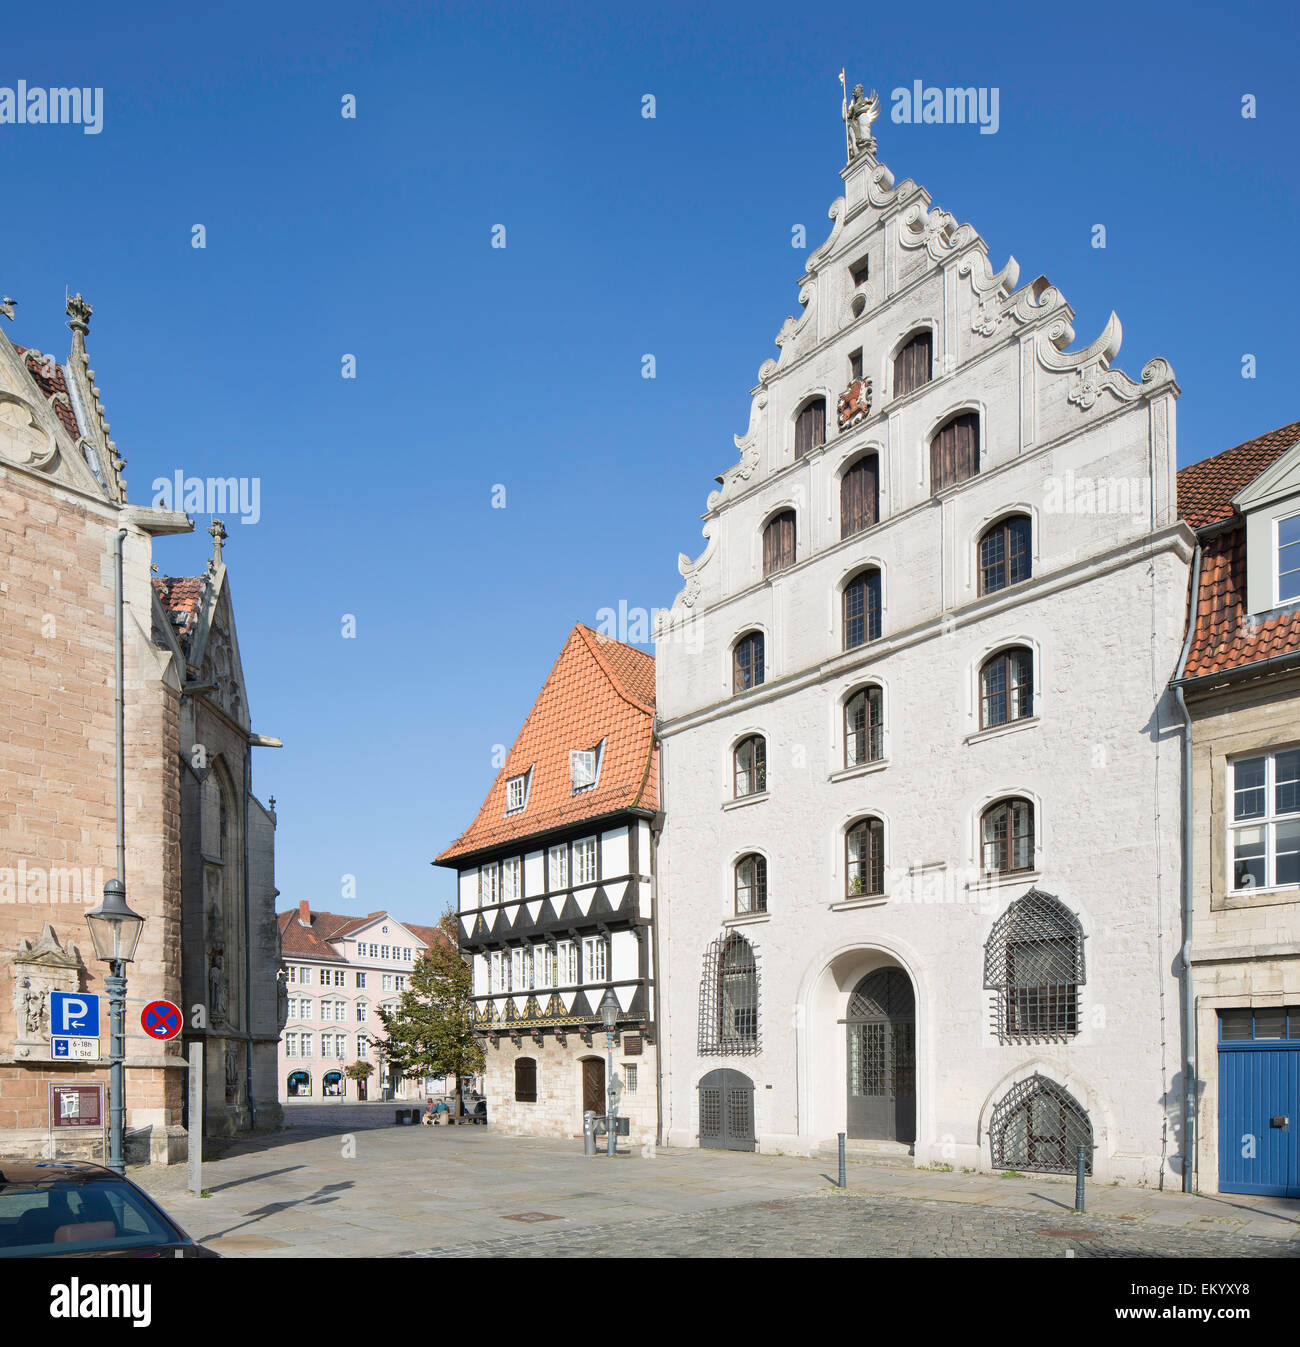 Former Gewandhaus on the Old Town Square, now home to the chamber of commerce, Braunschweig, Lower Saxony, Germany Stock Photo